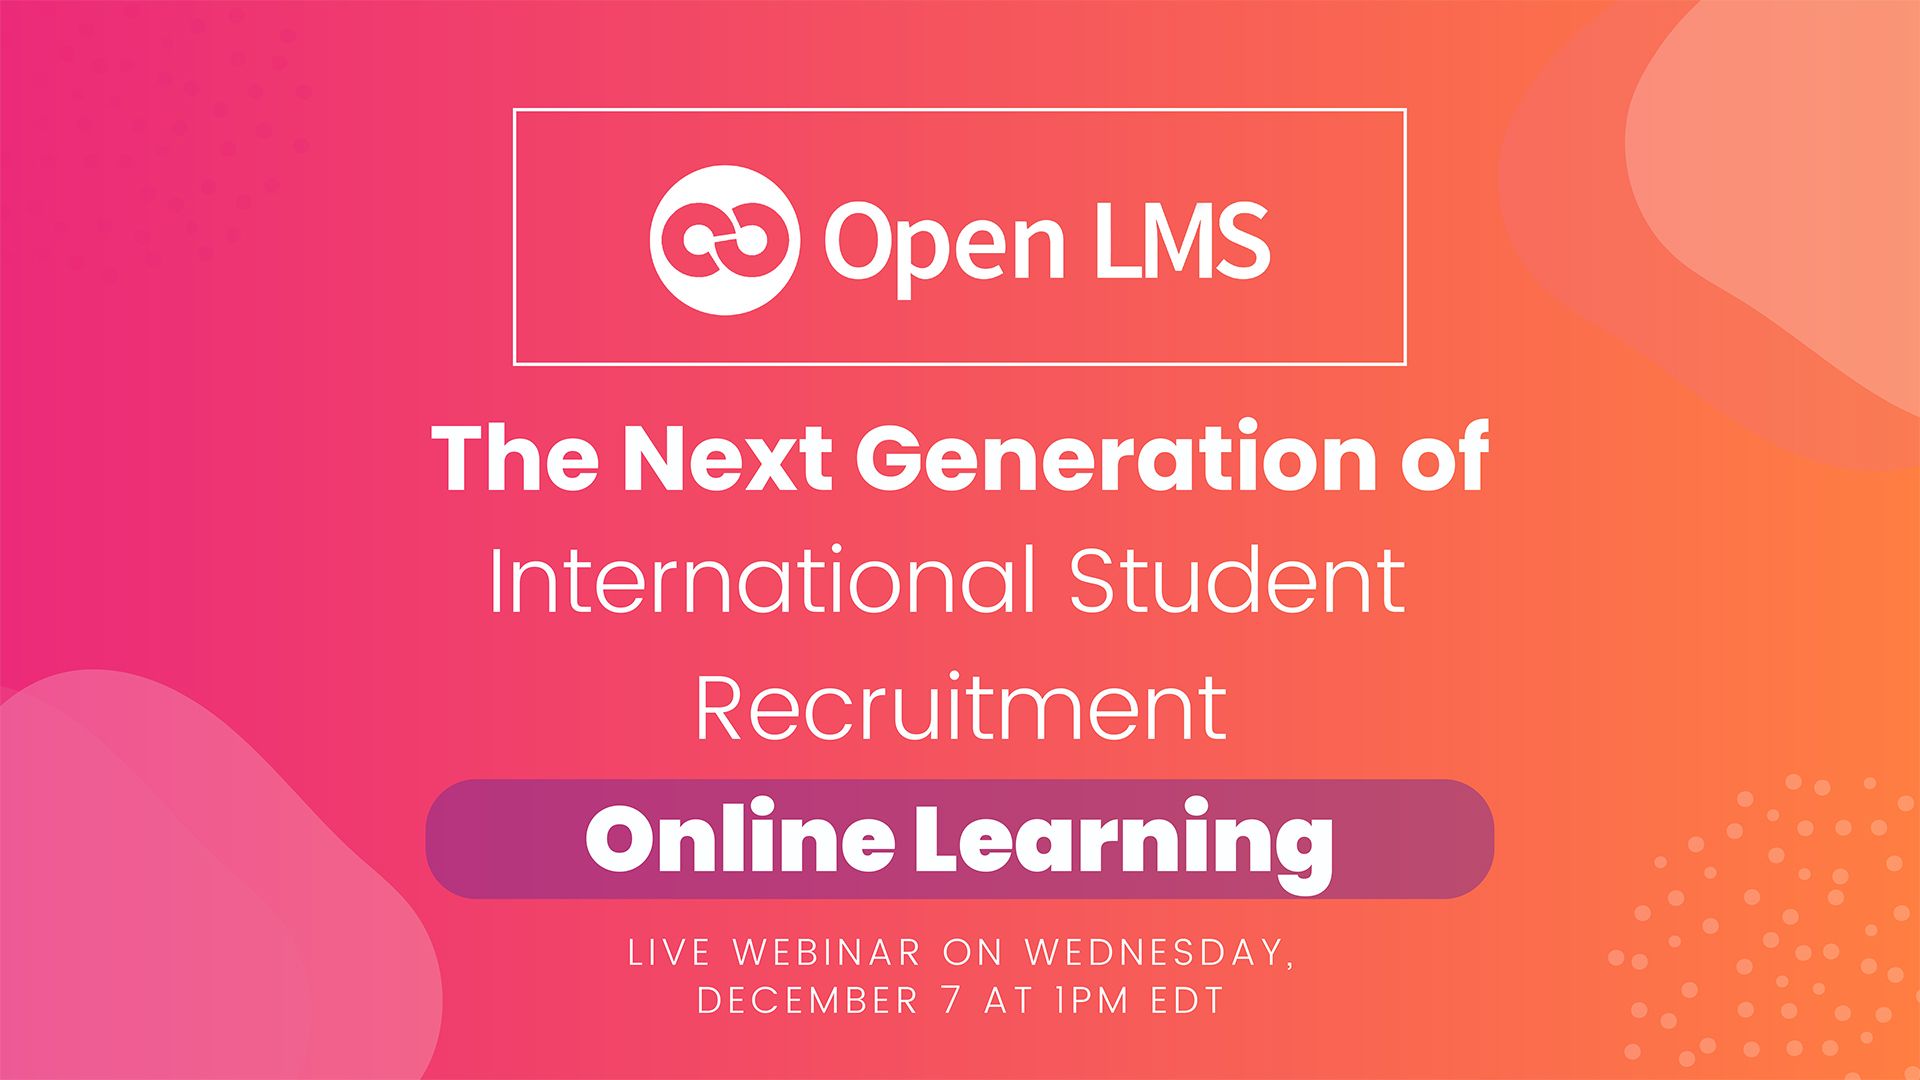 The Next Generation of International Student Recruitment: Online Learning